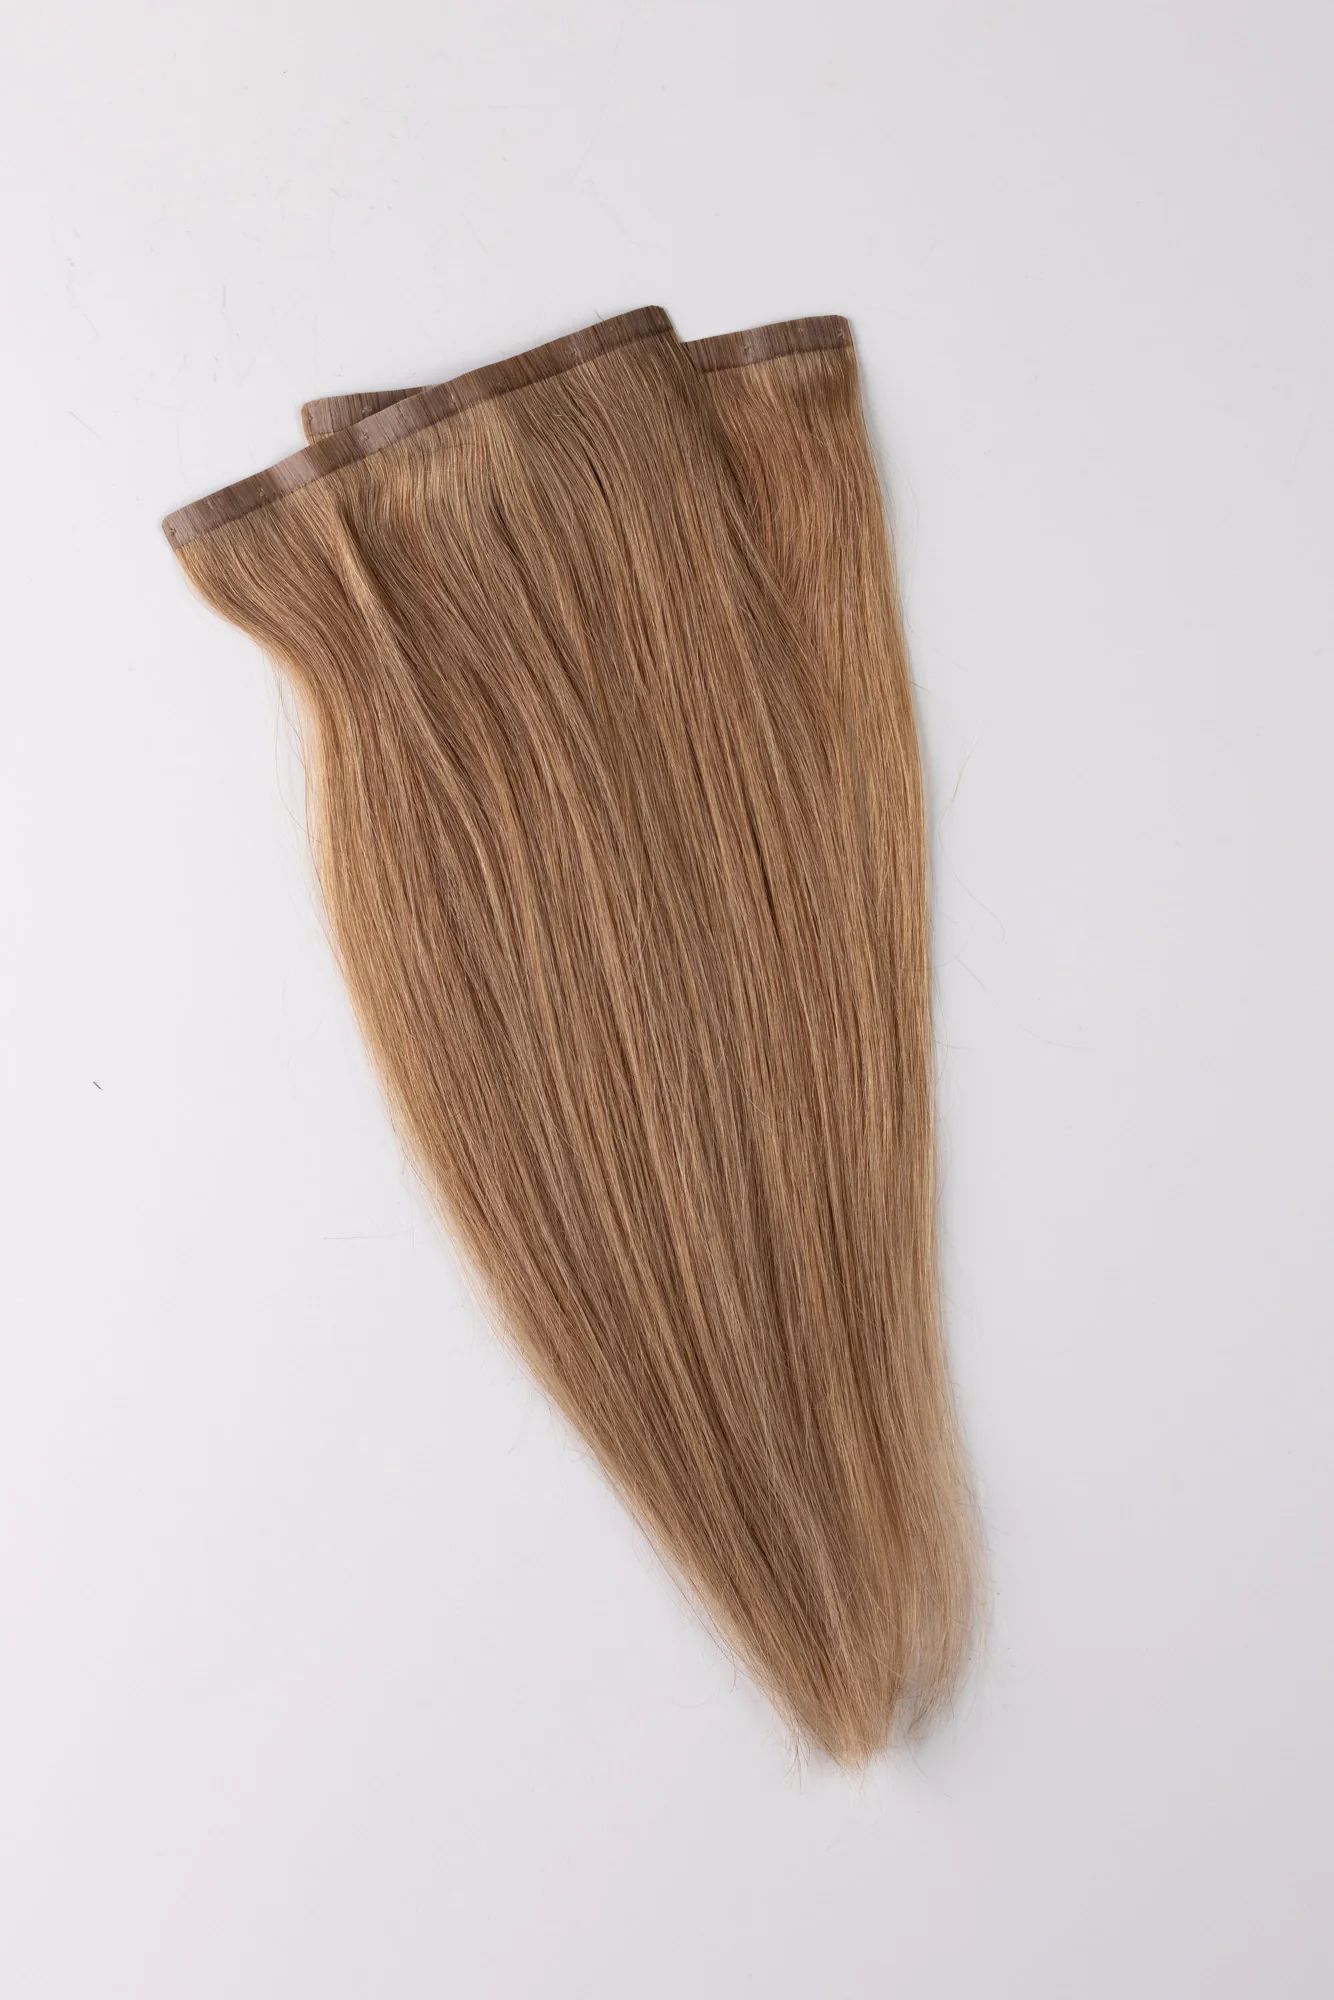 BFB | 35 gram 14" Fill-ins - Hair Extension - For Volume - Bronde | Barefoot Blonde Hair